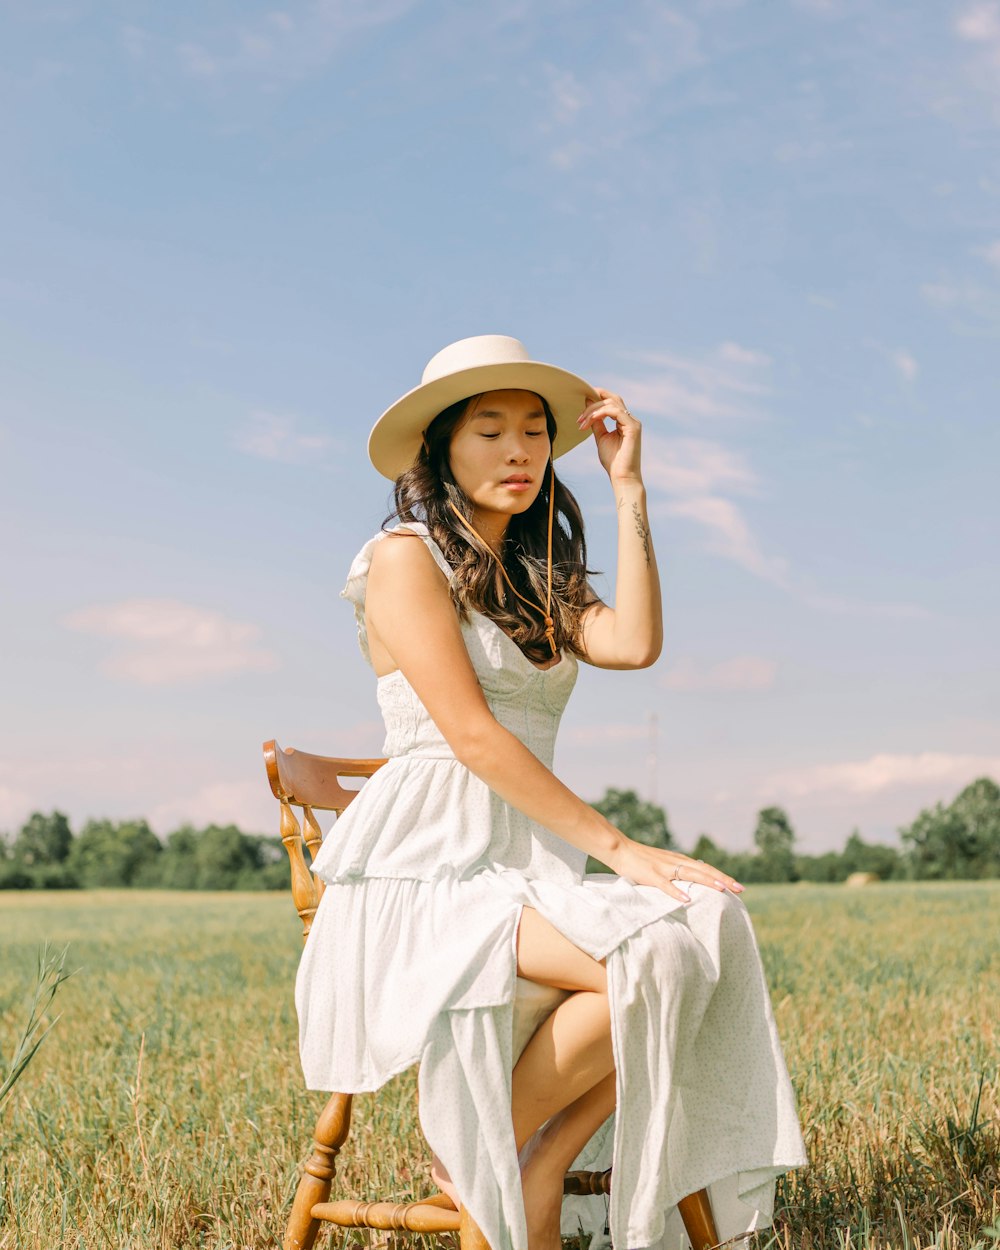 a person in a white dress and hat sitting in a field